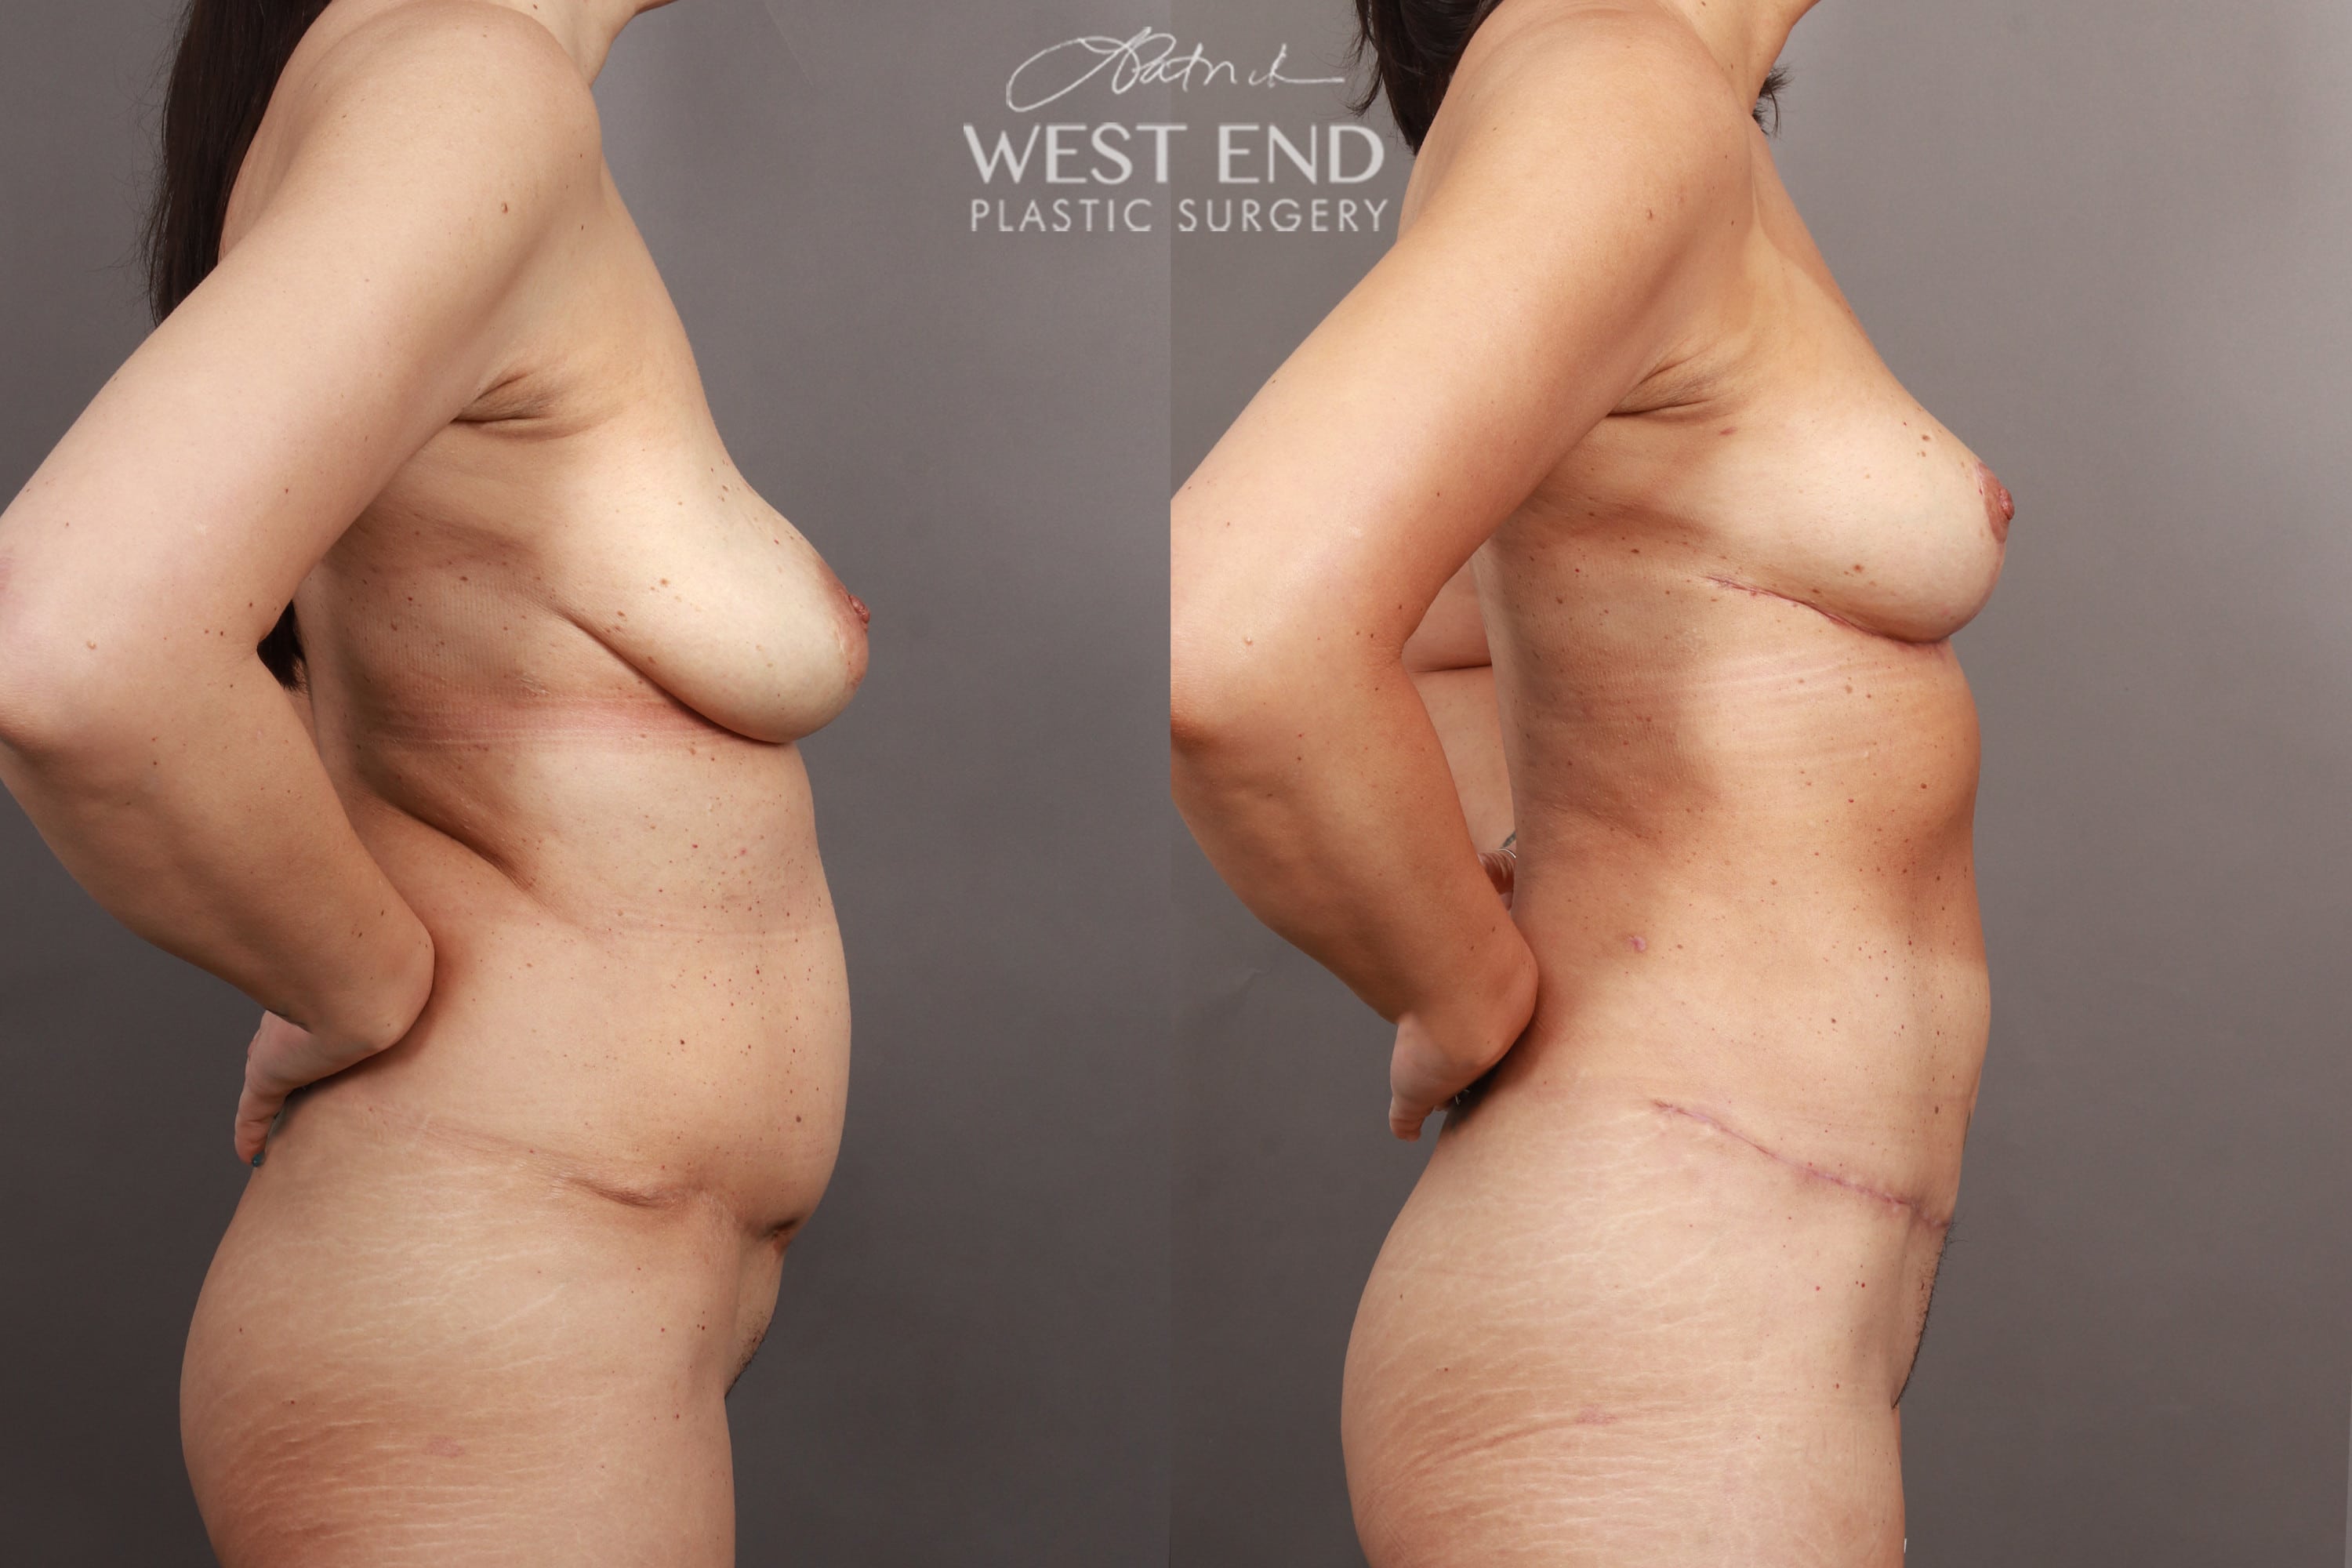 Breast Lift, Liposuction, & Scar Revision (3 Months Post-op)